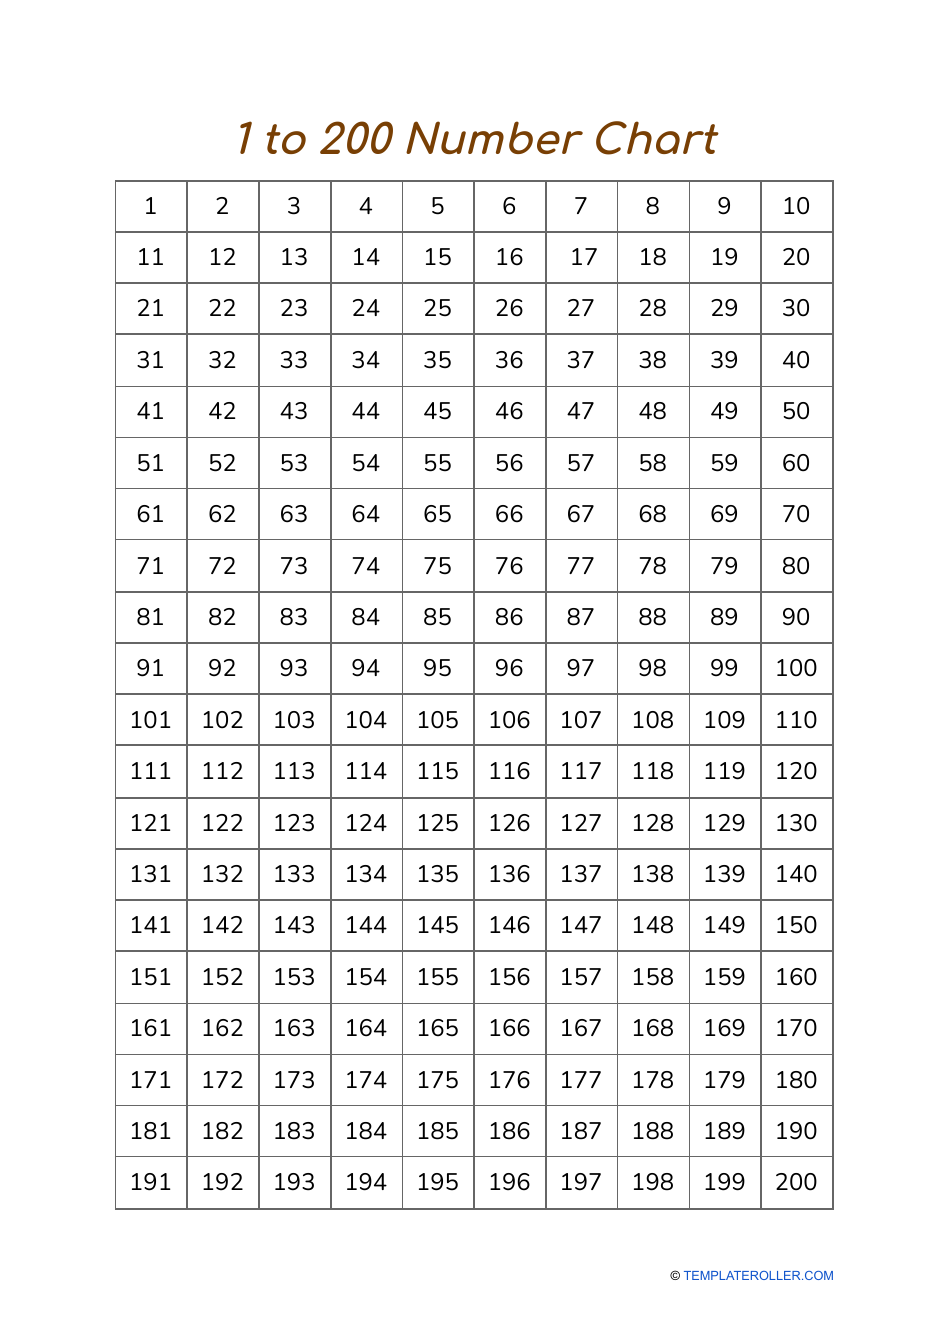 1 to 200 Number Chart Preview